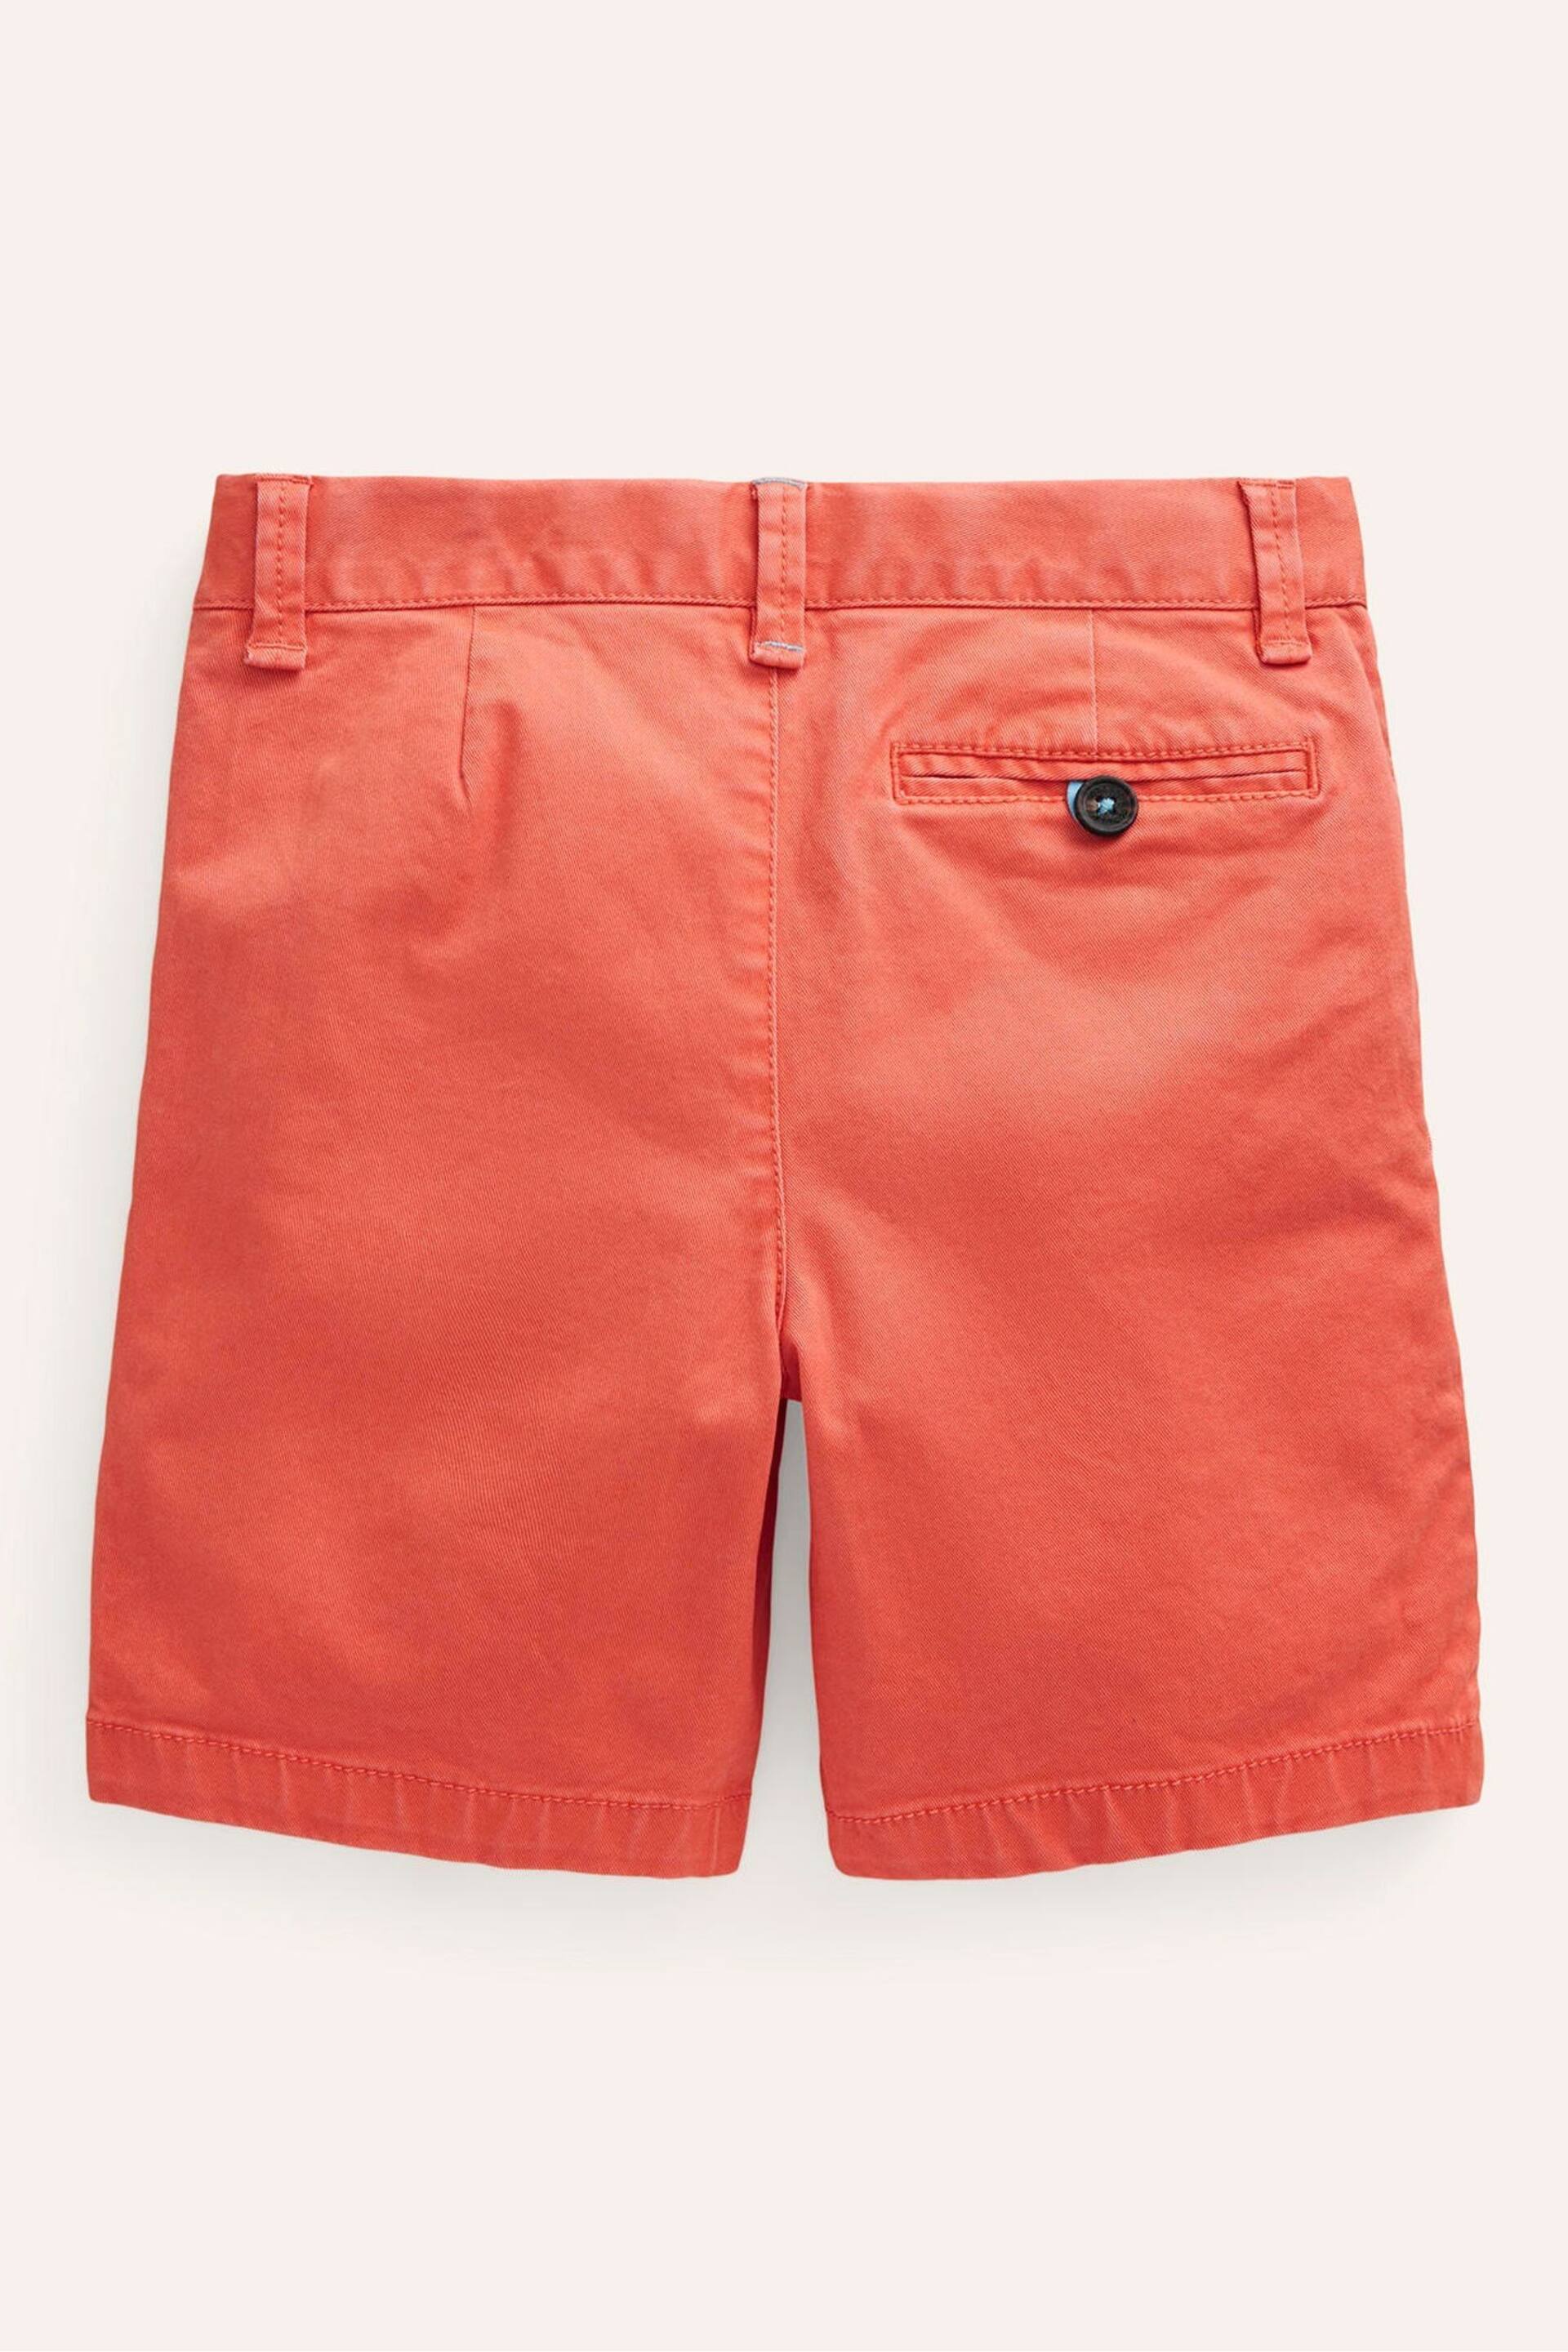 Boden Pink Classic Chino Shorts - Image 2 of 3